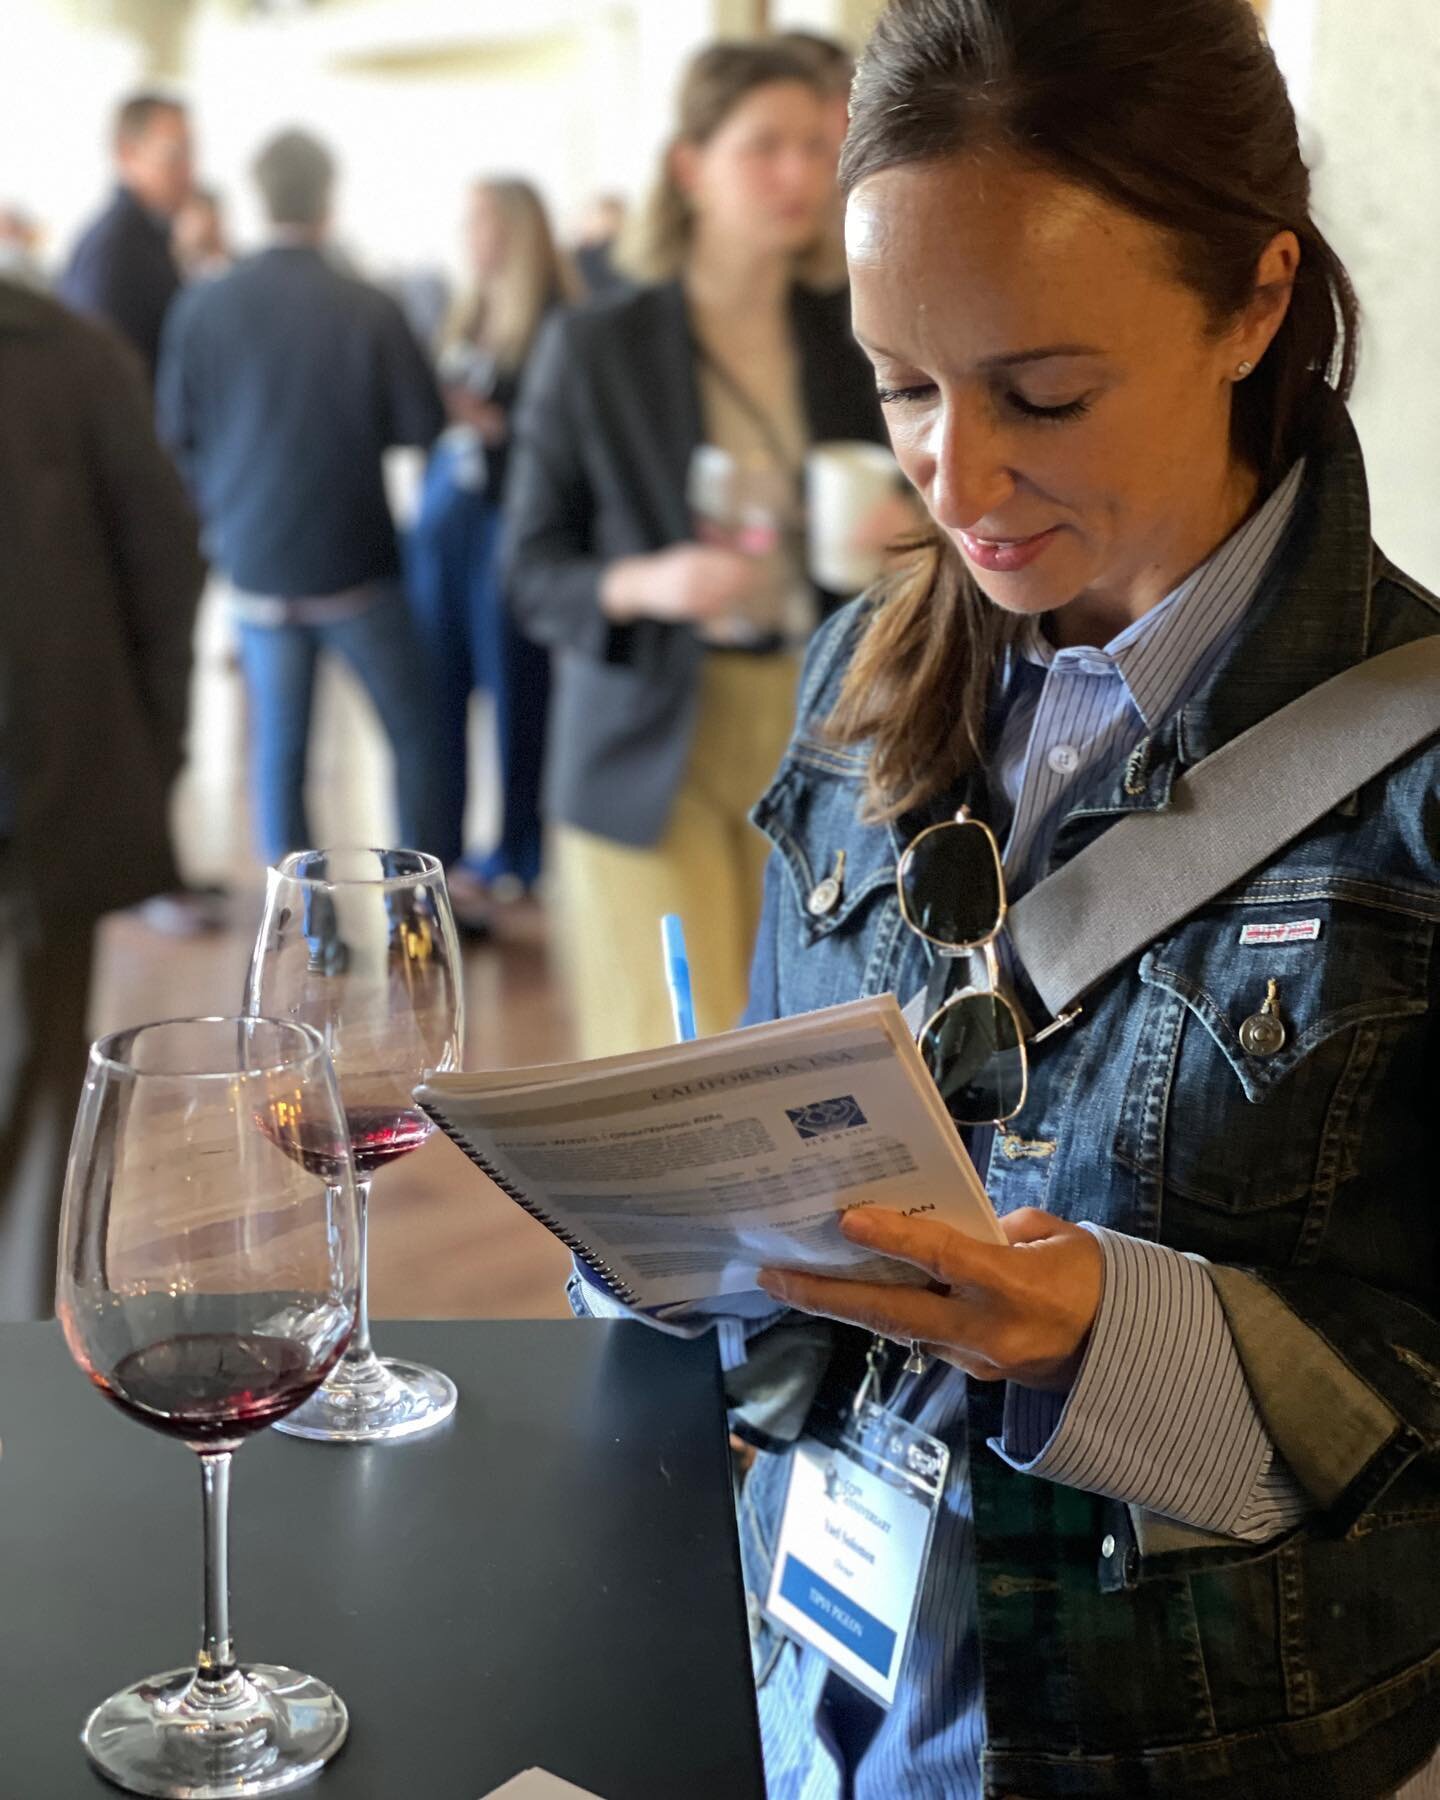 We love tasting and selecting new wines that will fit your palates!

🍷We discovered a new Zinfandel that you are going to love @evaimbradley and @clbradley 

👉🏼 If you love Zinfandels too then head to our website to get your hands on it!

#zinfand